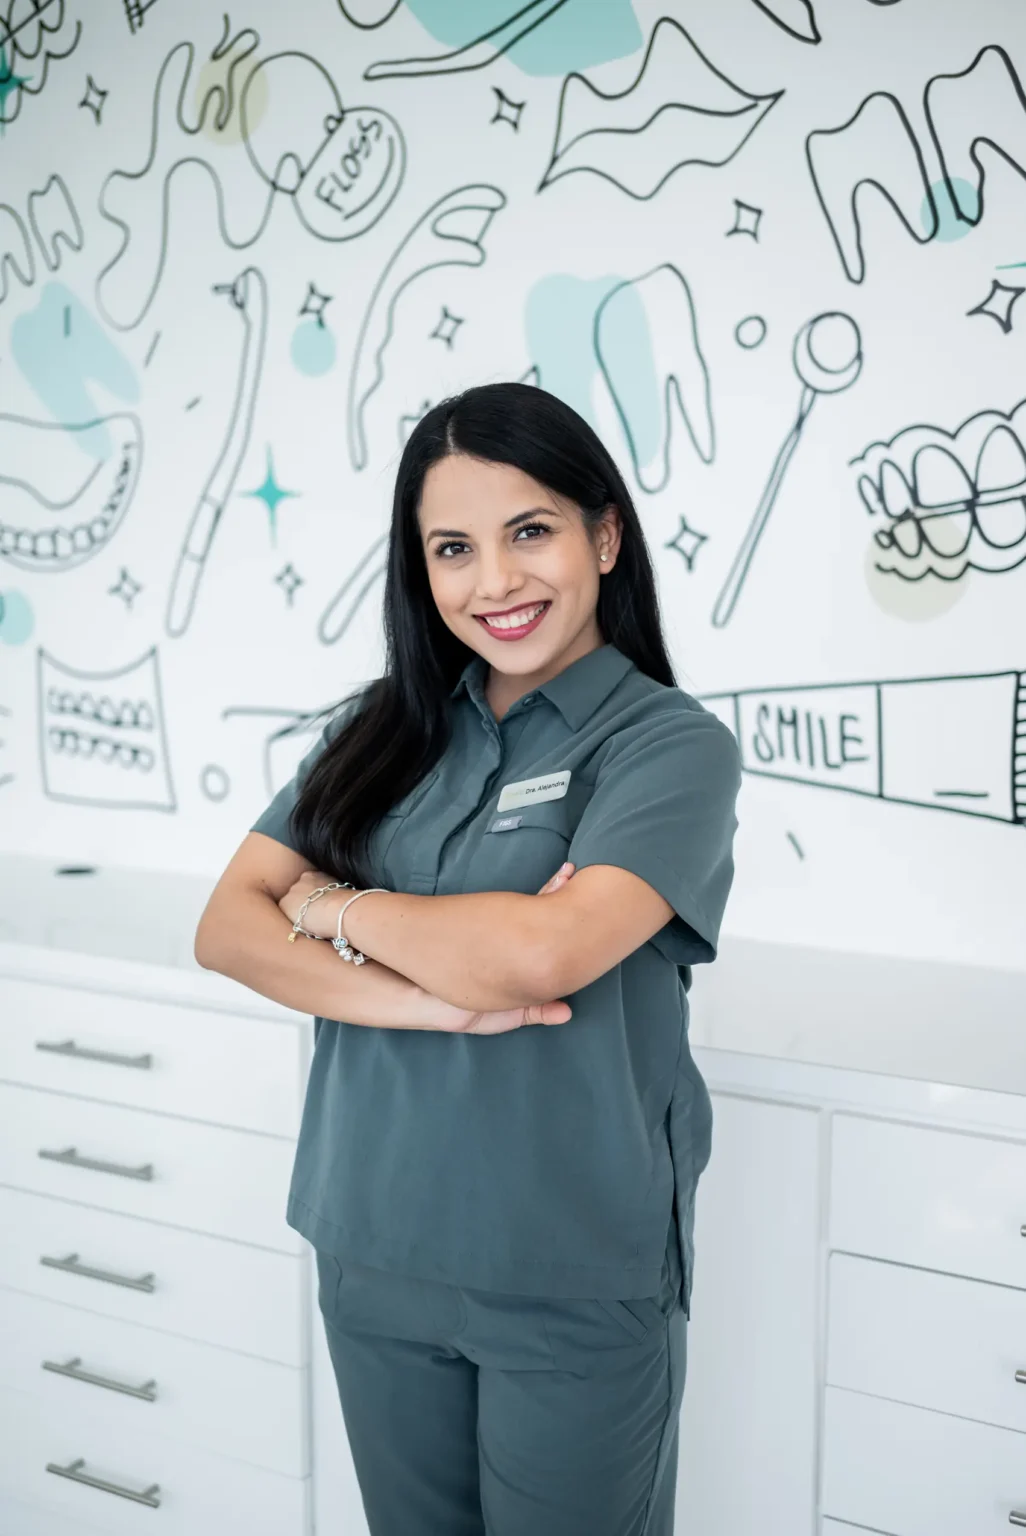 A woman in dental scrubs smiling confidently in front of a mural with dental-themed illustrations.